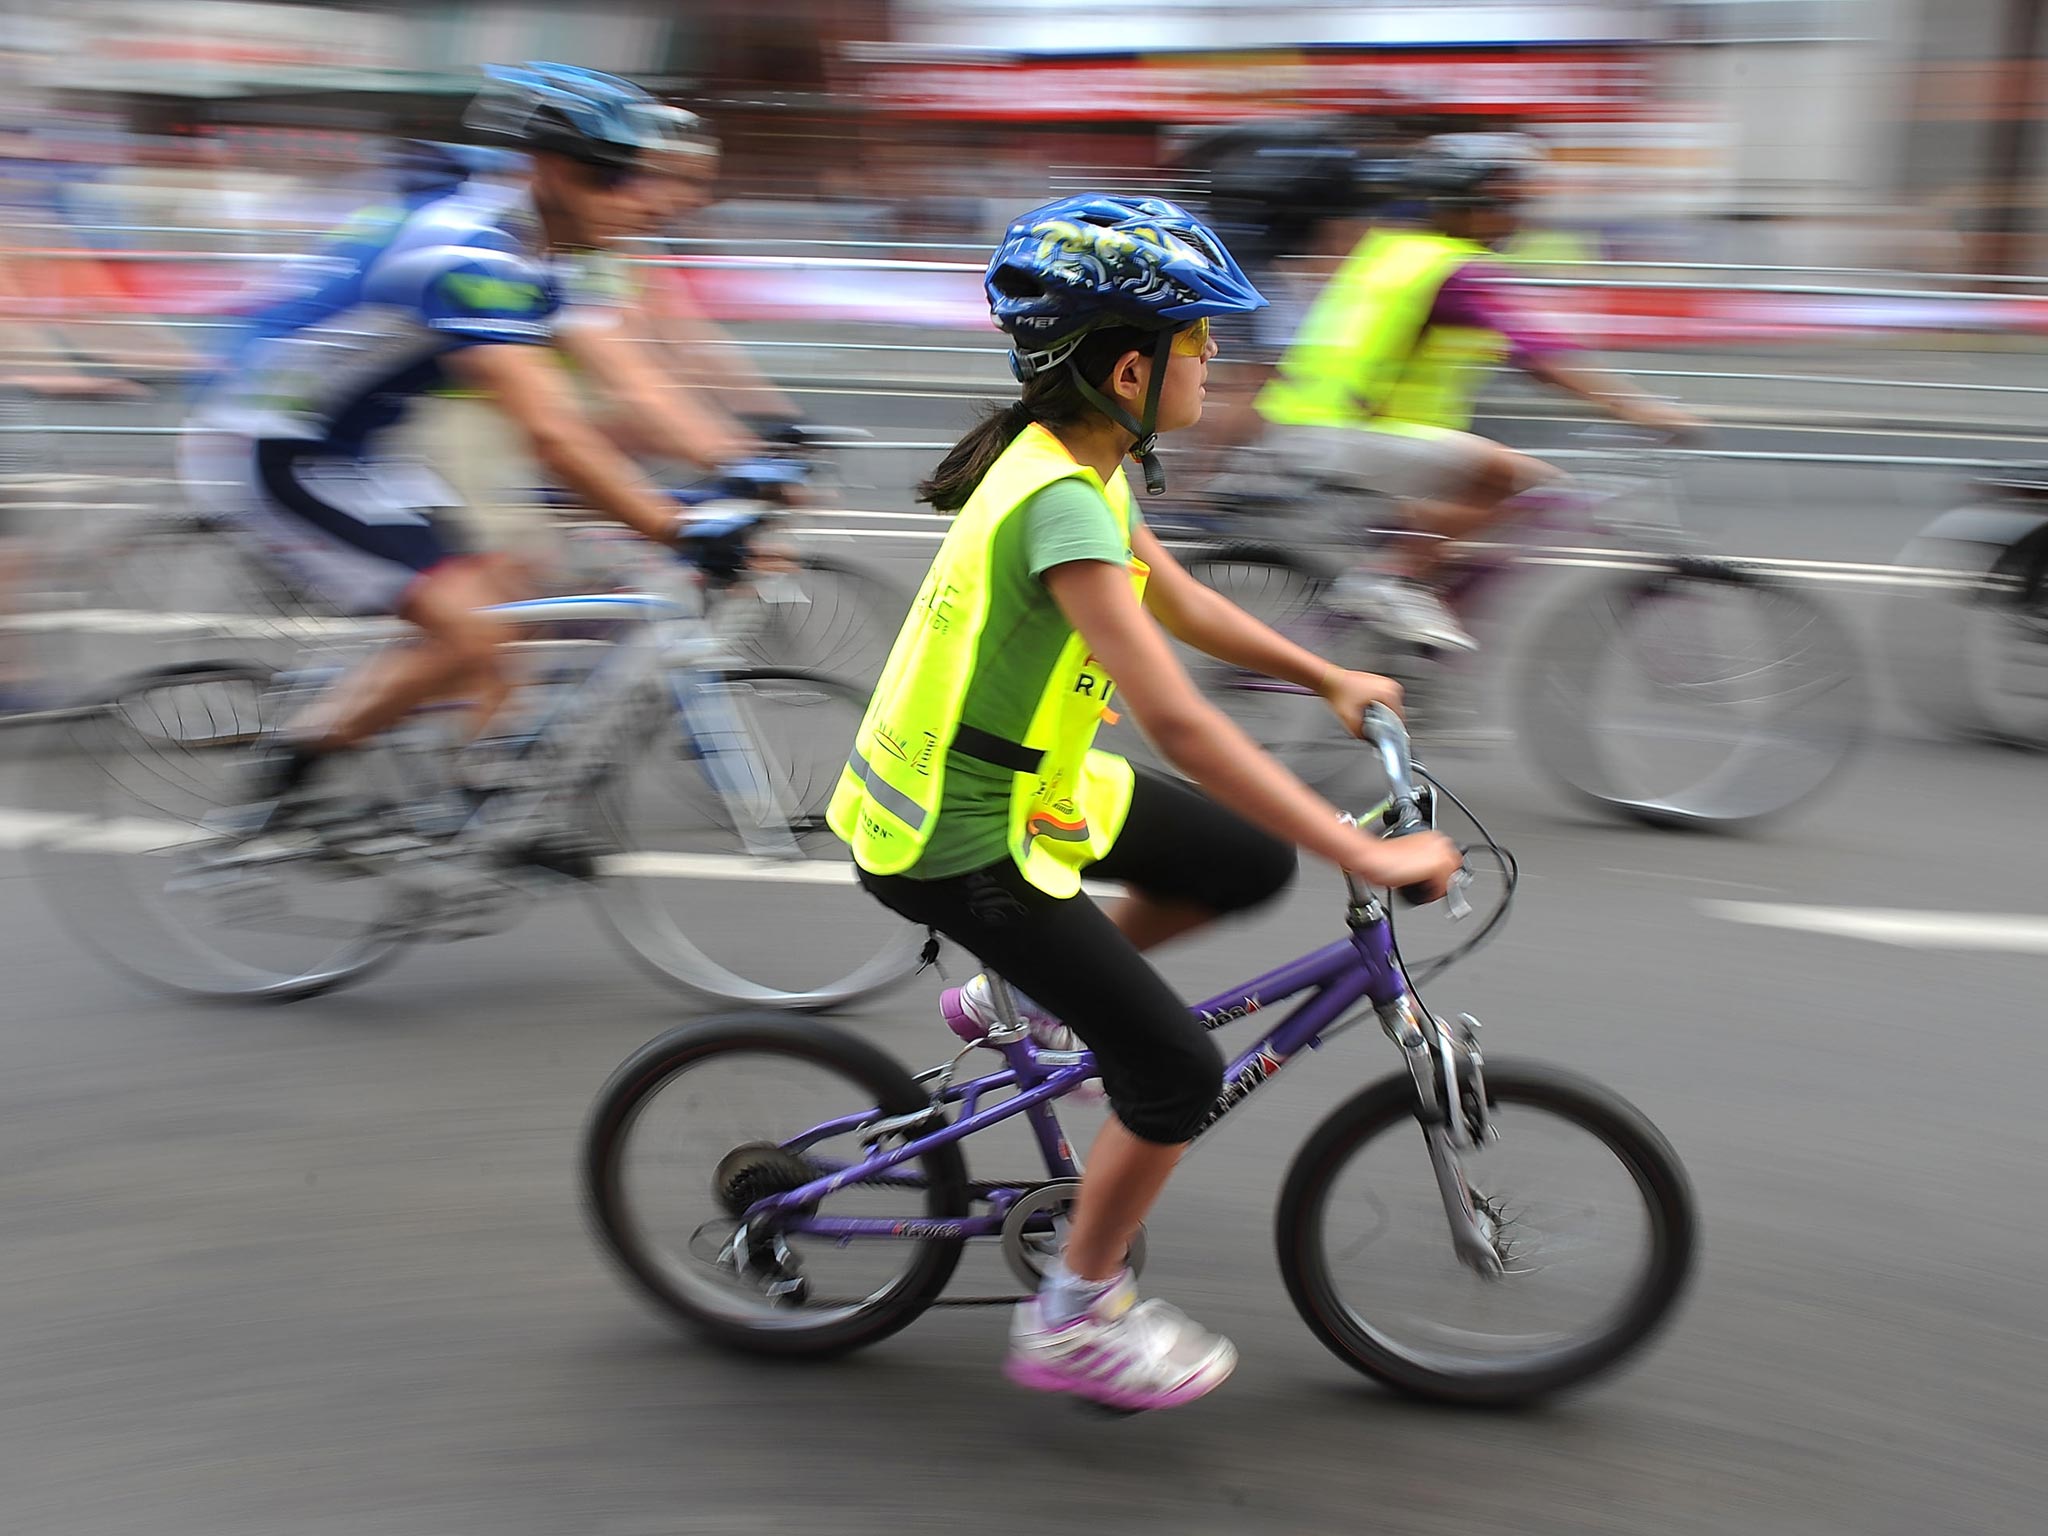 The number of children cycling to school regularly more than doubled when training courses and cycling facilities were provided